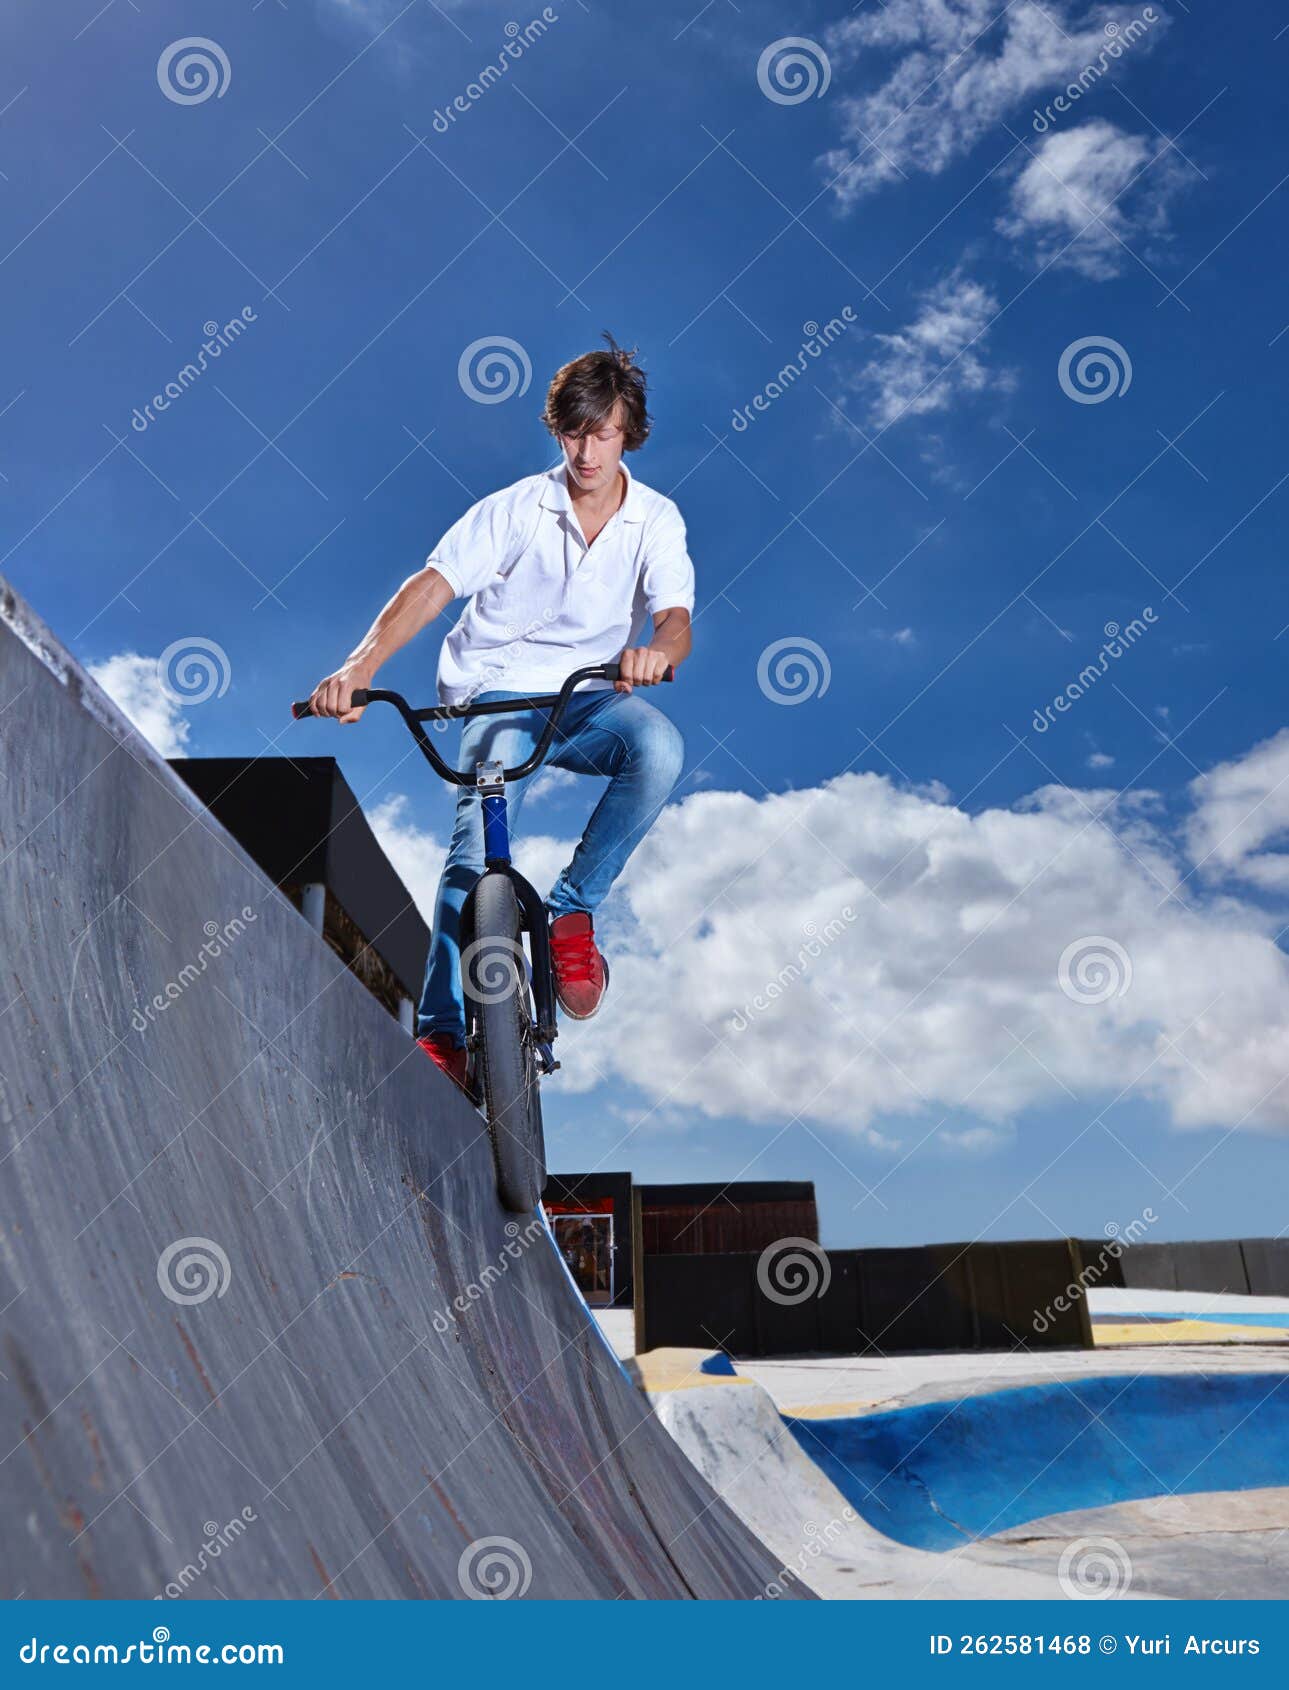 practicing for the x games. full length shot of a teenage boy riding a bmx at a skatepark.